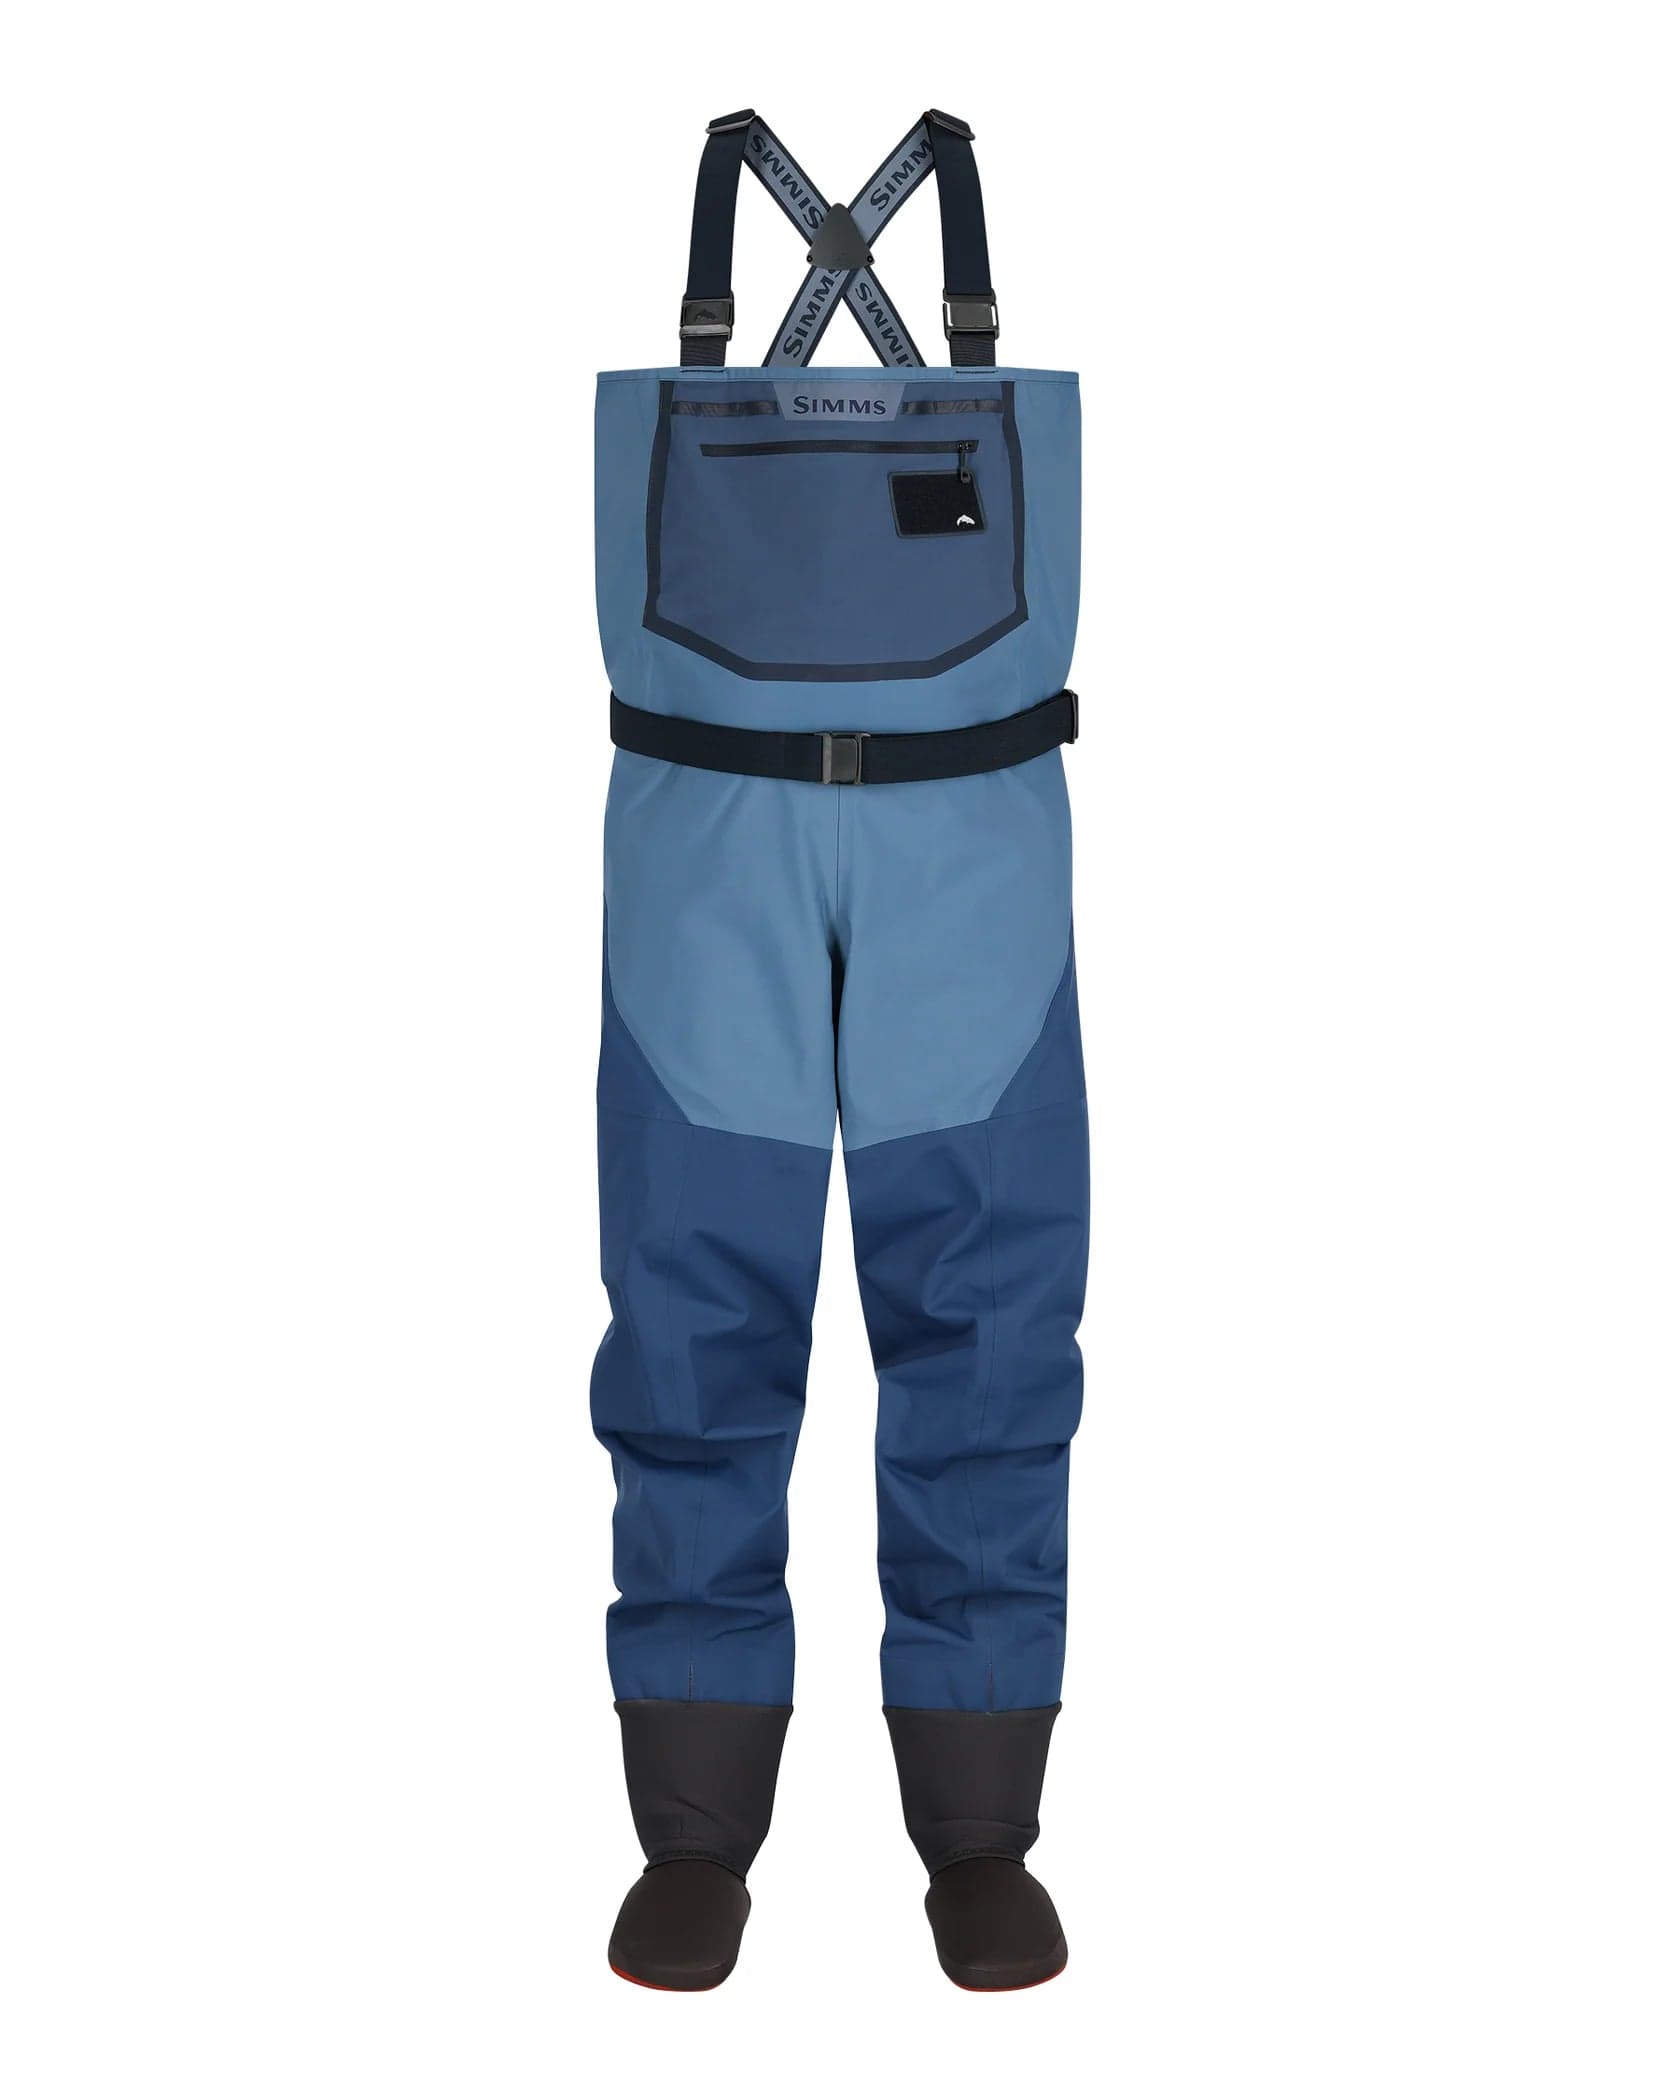 Simms Waterproof Wader Pouch - The Saltwater Edge